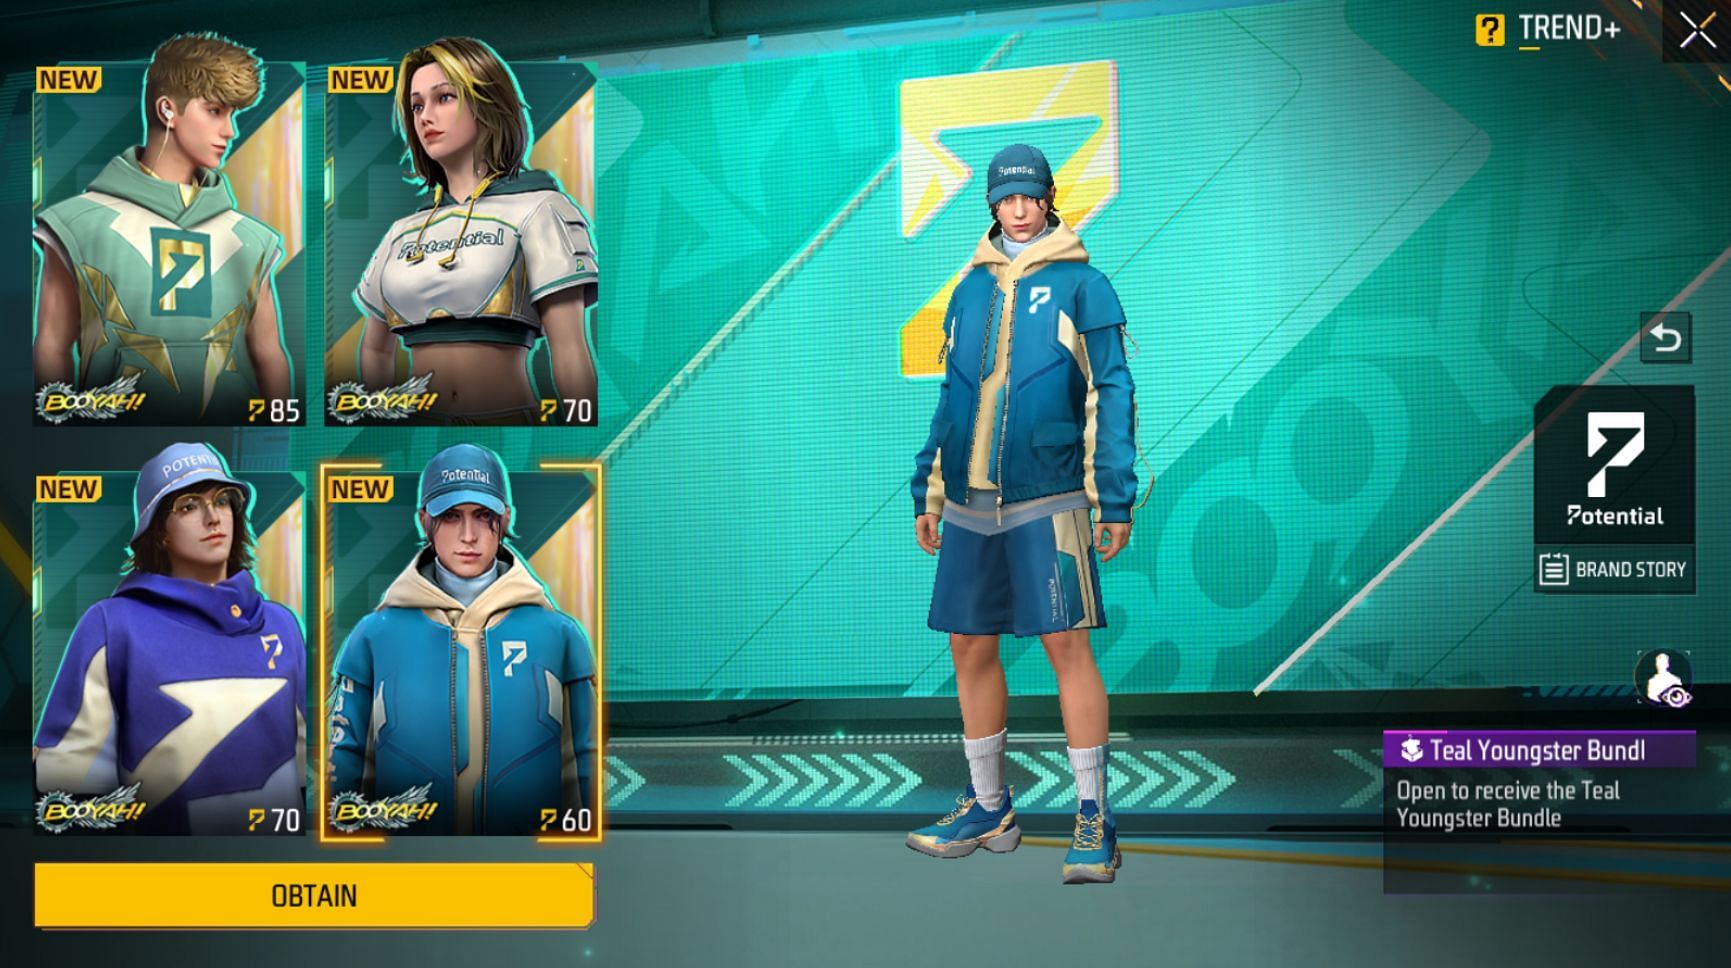 Teal Youngster Bundle from Potential brand (Image via Free Fire MAX)